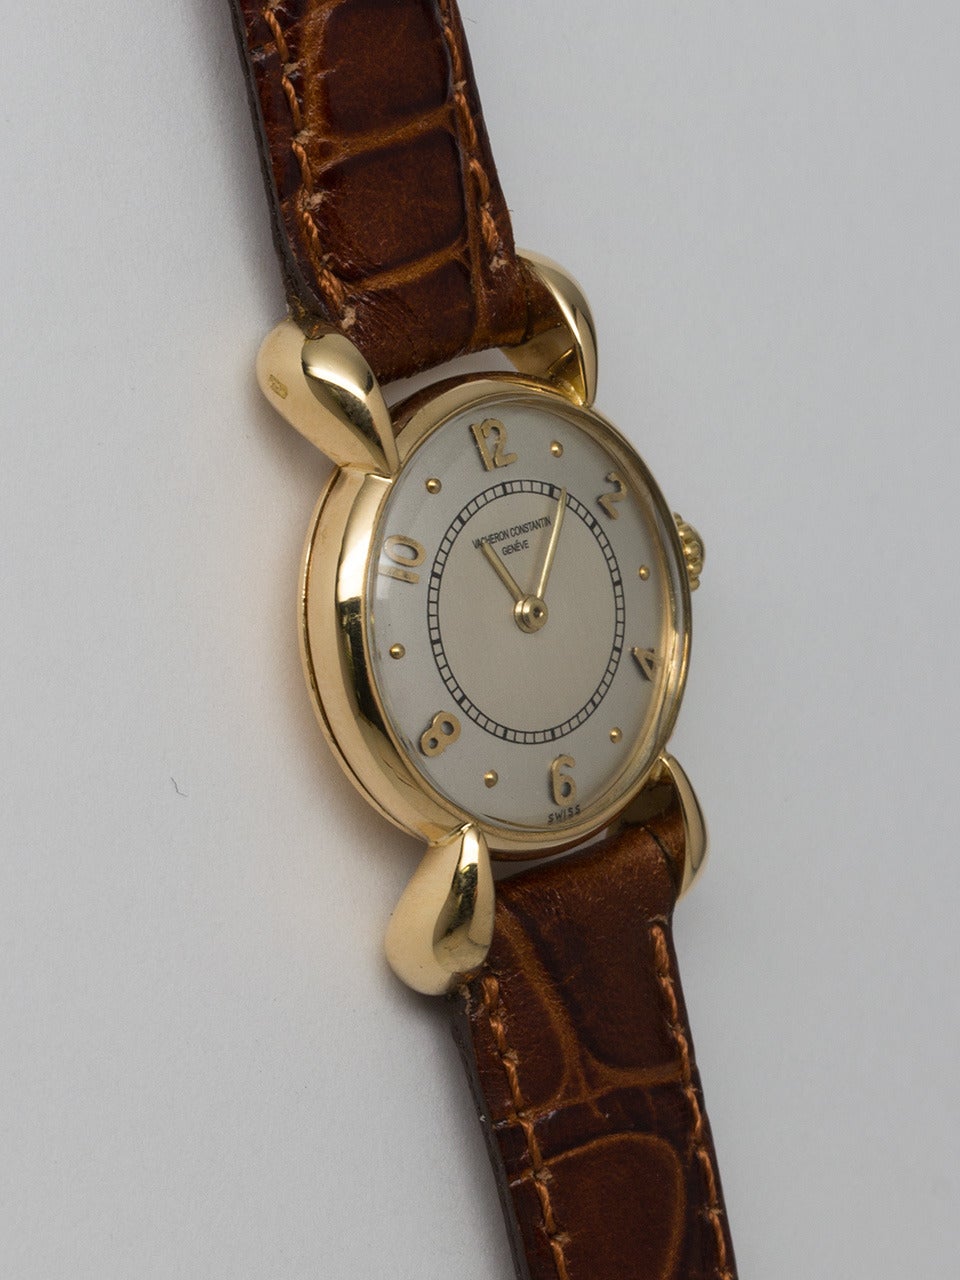 Vacheron & Constantin 18K Yellow Gold Lady's Dress Model Wristwatch, circa 1950's. 21 x 38mm case with large and dramatic lobed lugs, mushroom style V & C crown. Very pleasing 2 tone silvered satin dial with raised gold indexes and gold leaf hands.